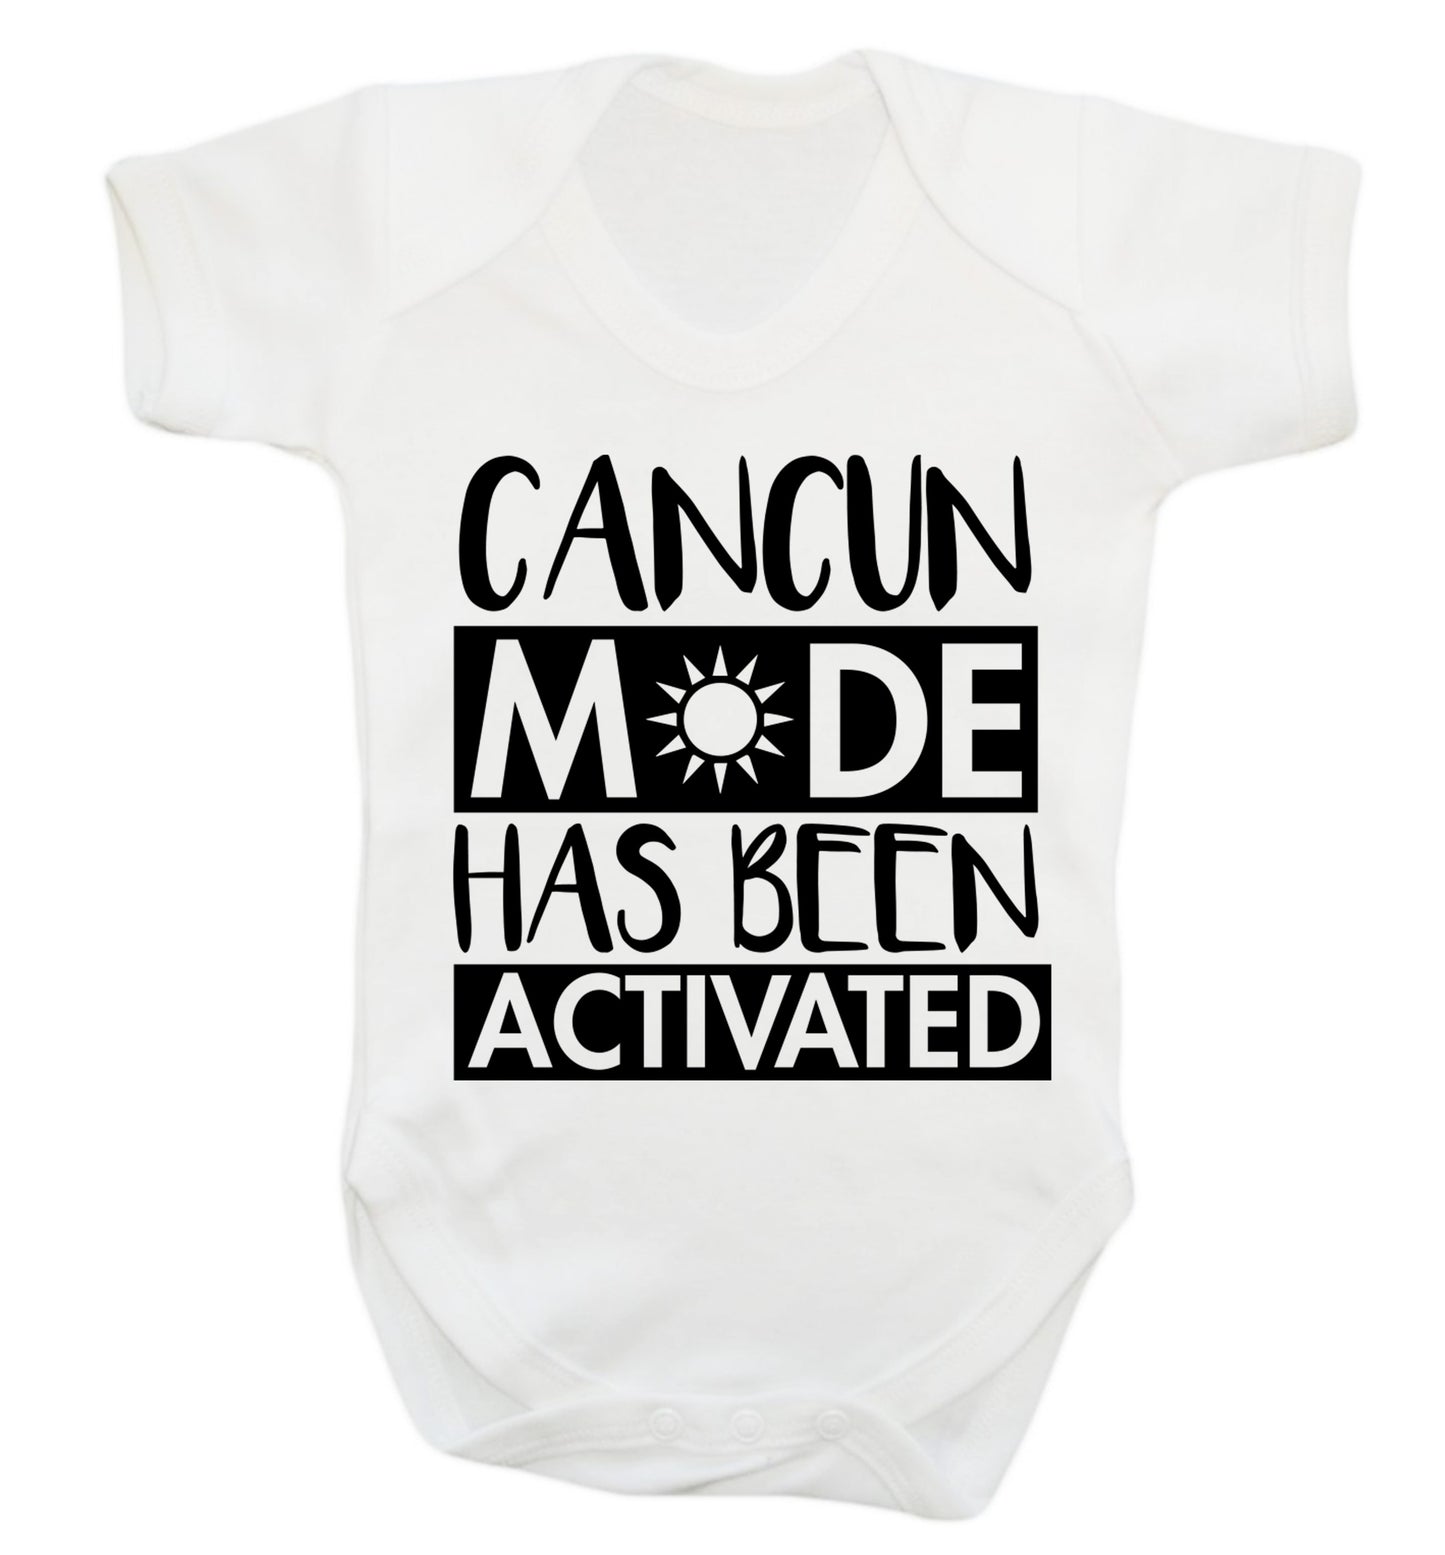 Cancun mode has been activated Baby Vest white 18-24 months